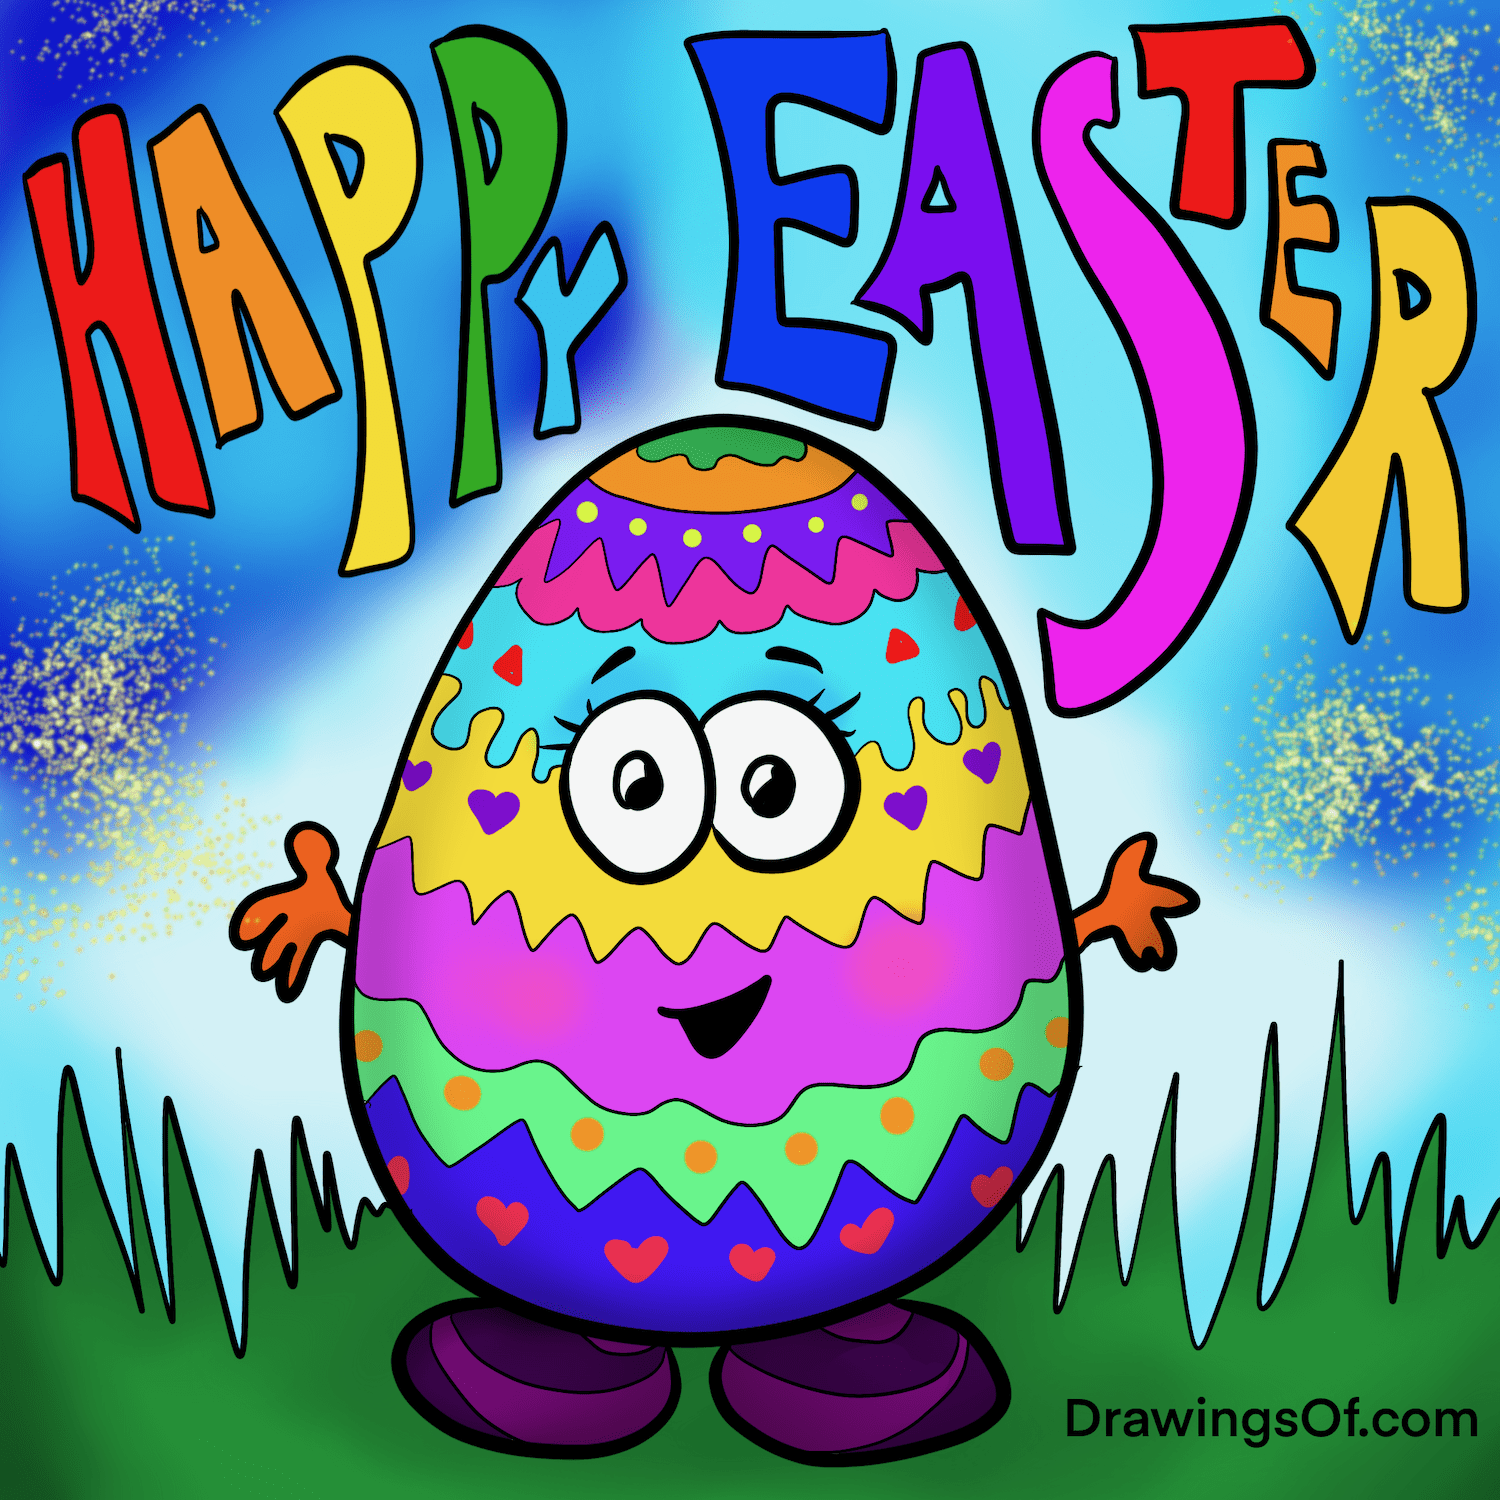 Easter egg drawing